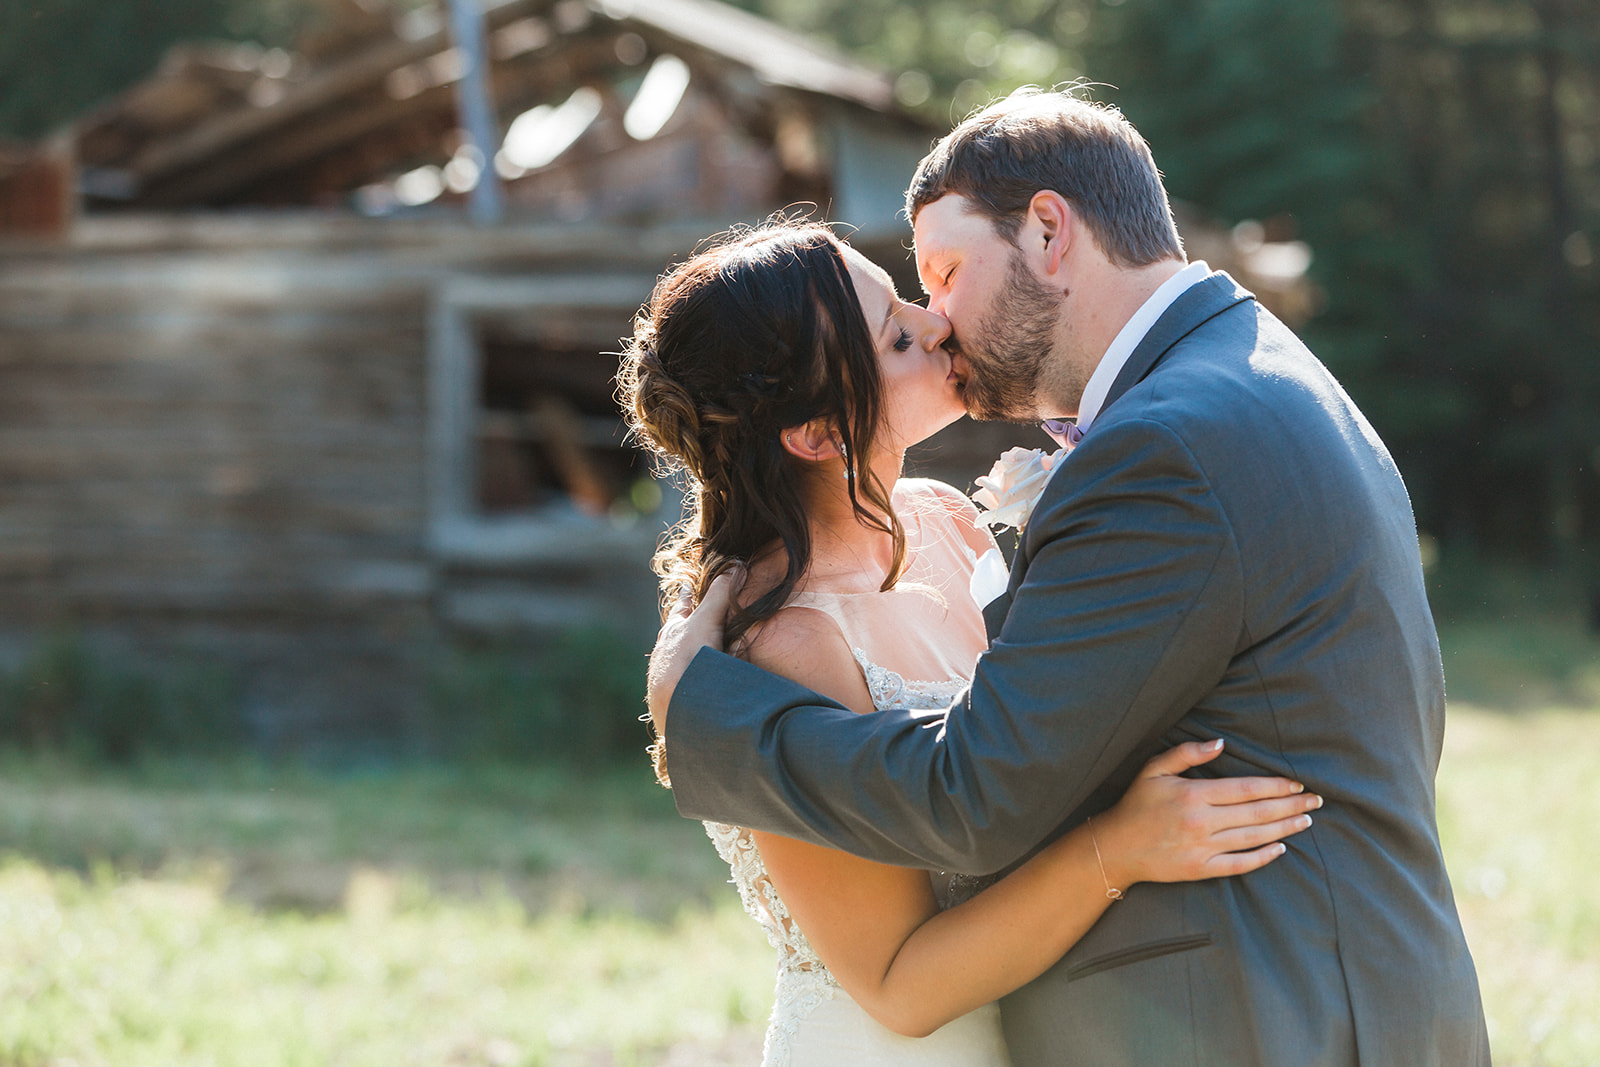 Bride and groom portraits from a summer backyard wedding in Minnesota